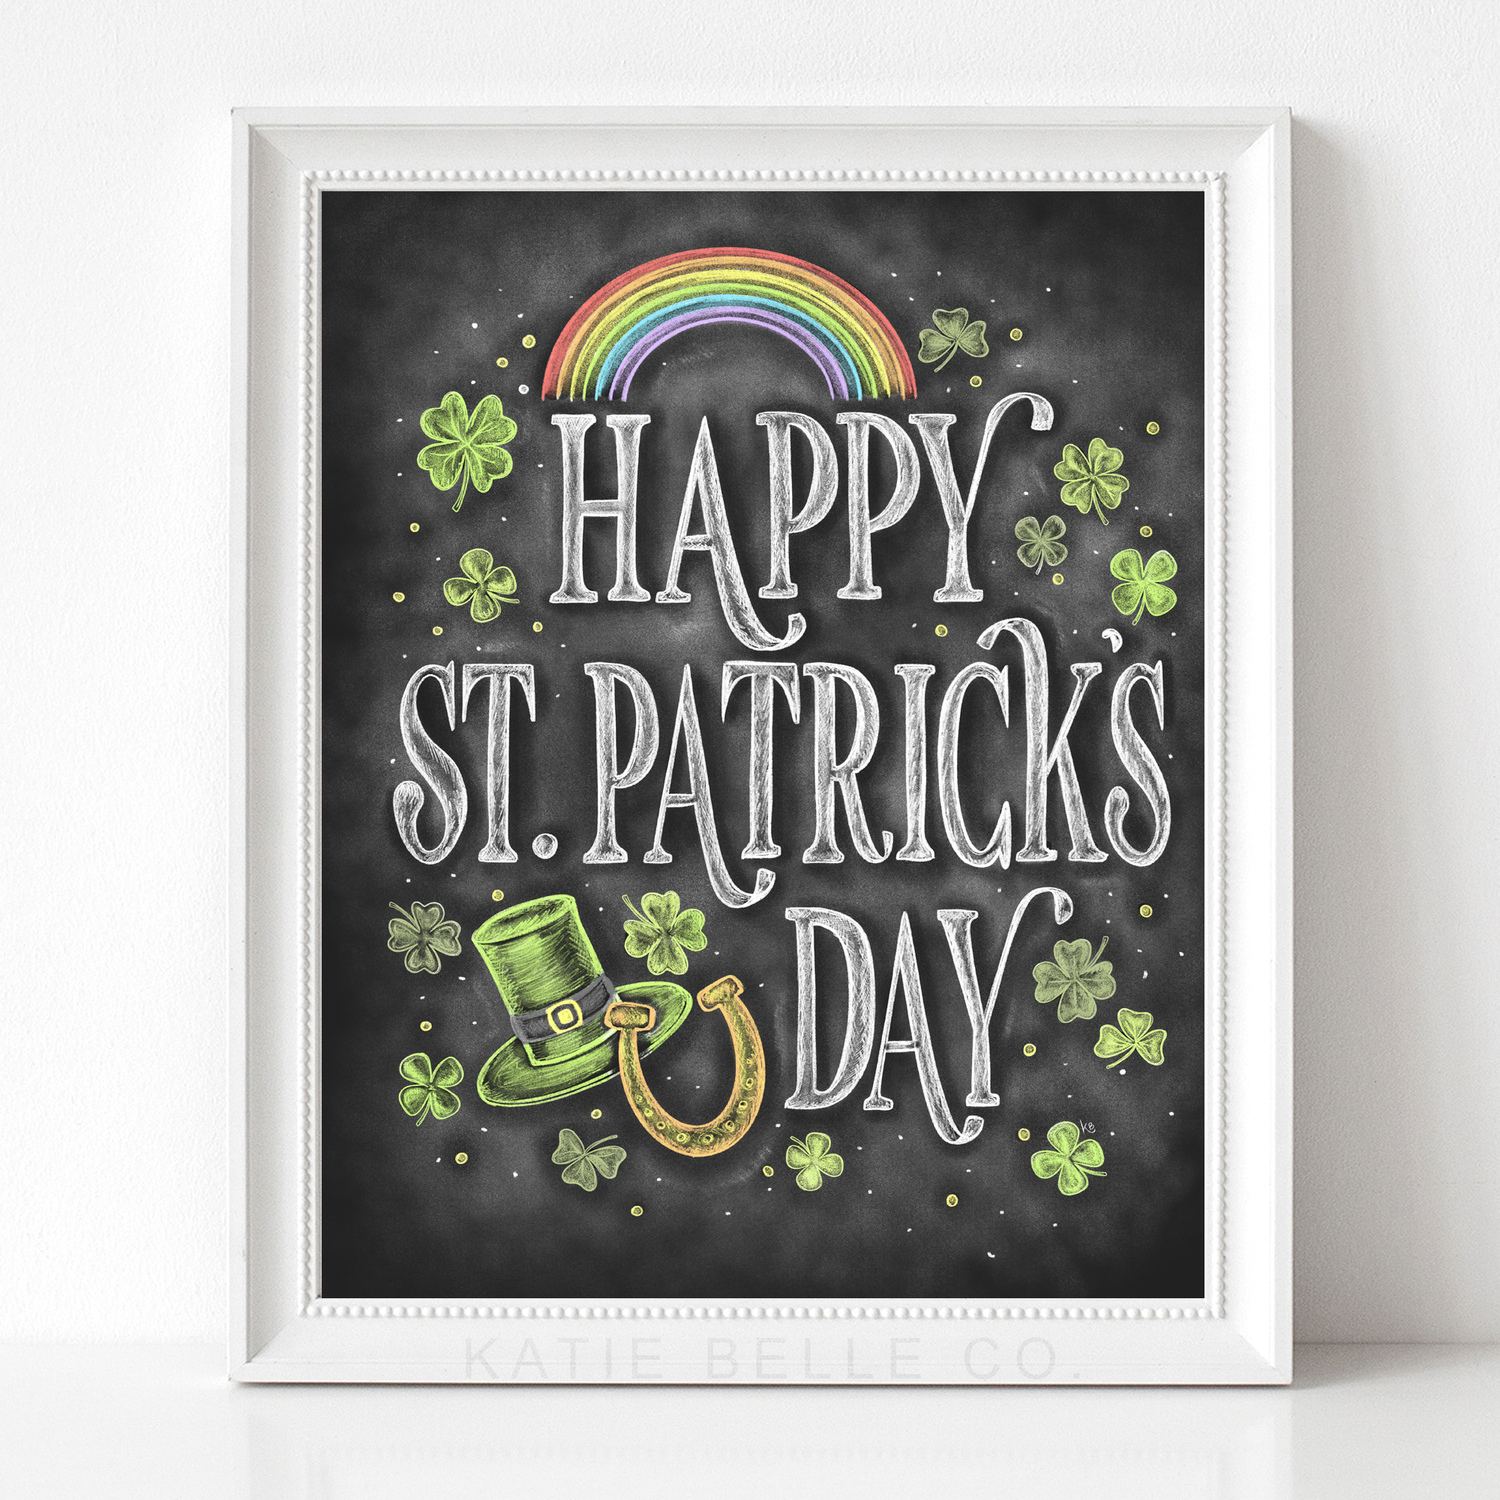 Happy St. Patrick's Day. Chalk Art. Chalkboard Print. Clovers. Rainbows. St. Patrick's day decor. St. Patrick's day decorations. Lucky Artwork.Irish traditions. Katie Belle Co. 